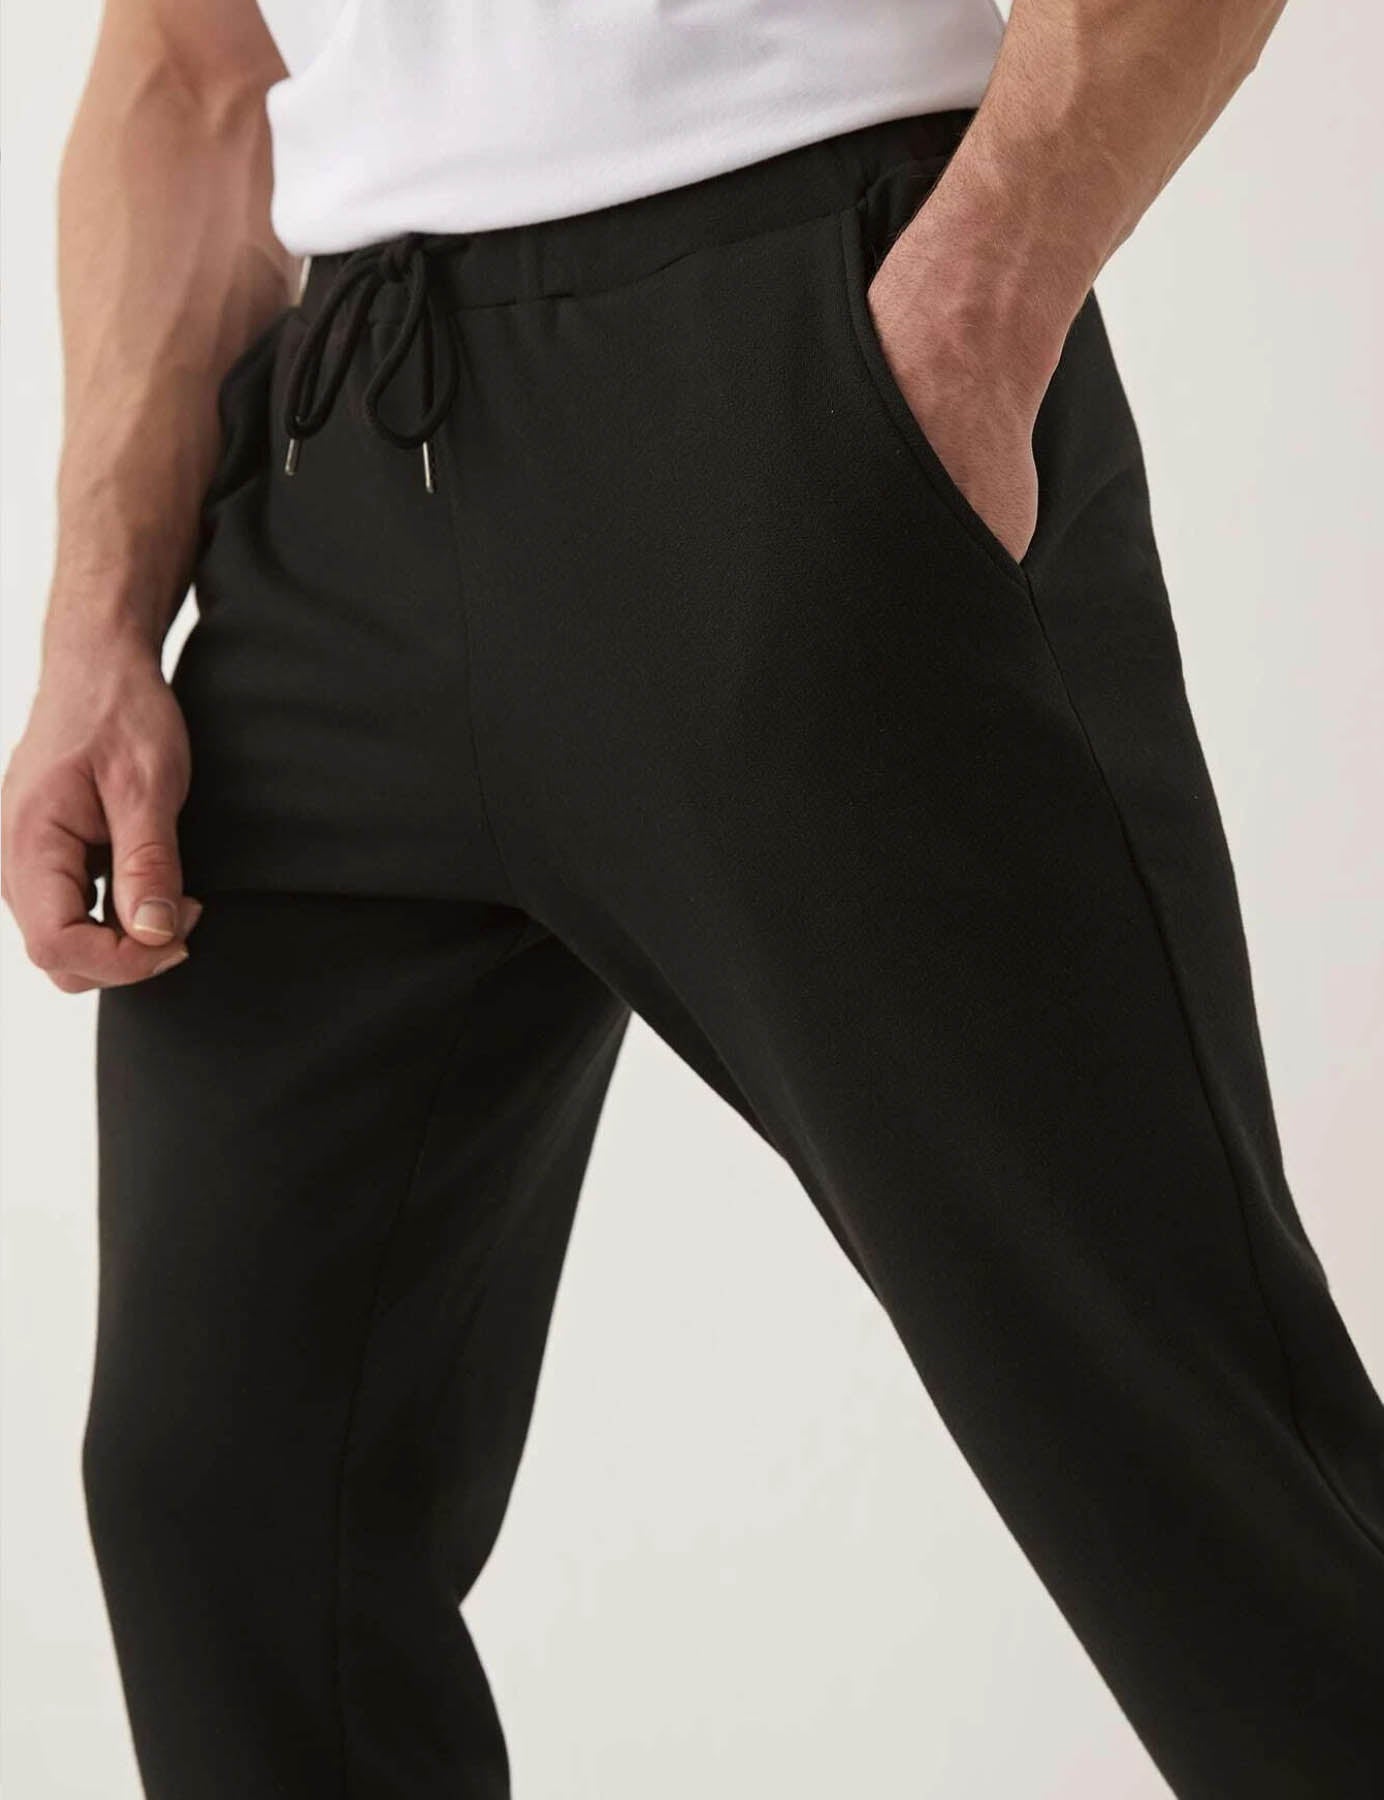 Buy ETHER Black Casual Regular Fit Trousers - Trousers for Men 1284721 |  Myntra